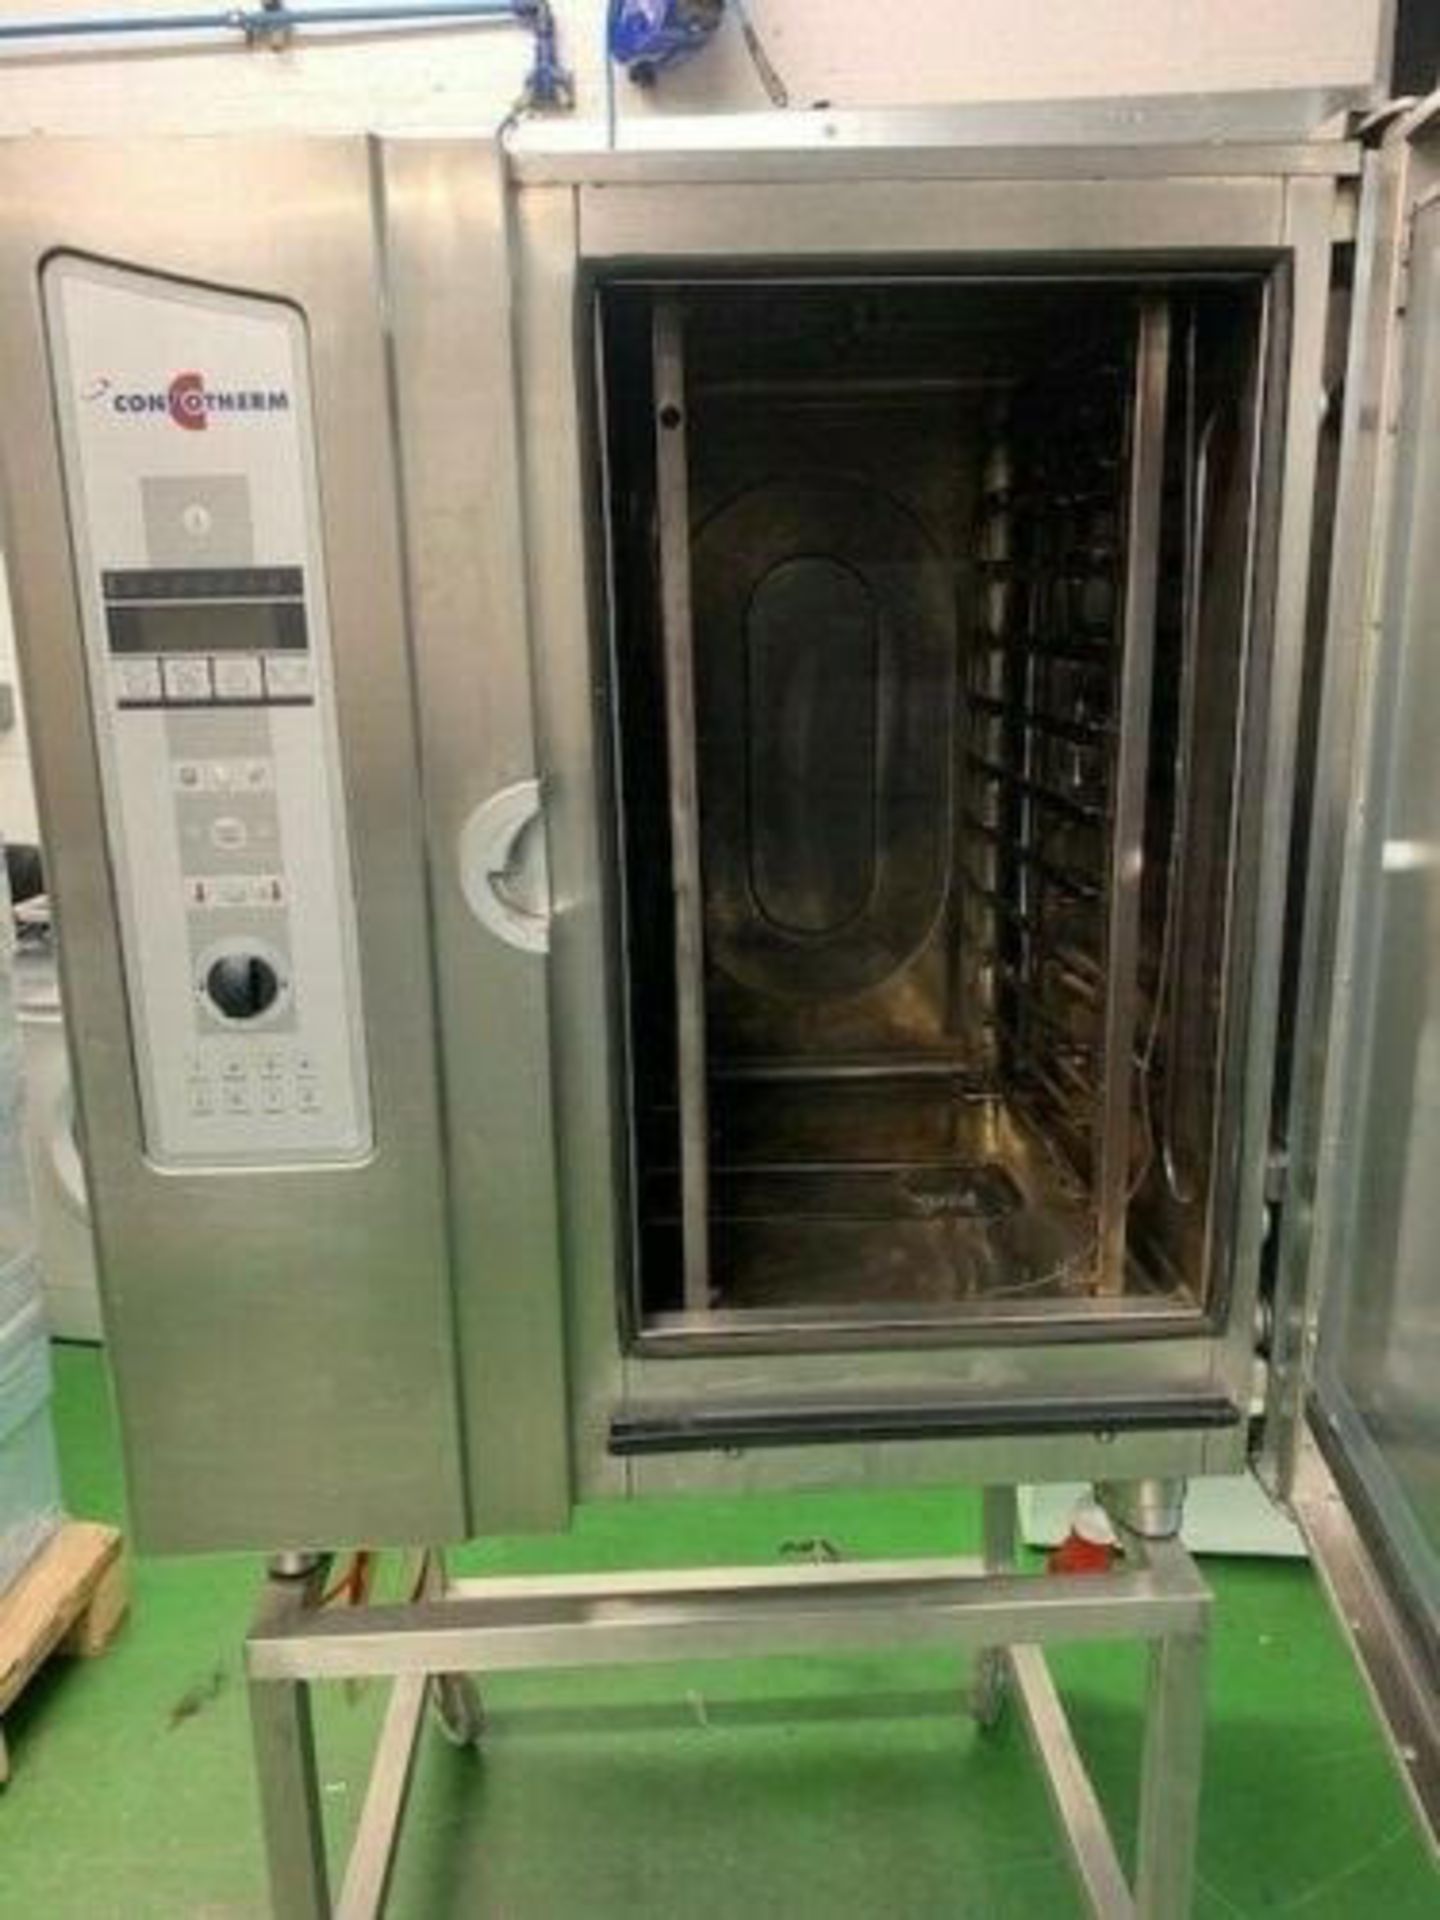 1 x Convotherm Combination Oven-Steamer - 3 Phase Electric - Model OEB 10.10 - CL531 - Location: - Image 4 of 6